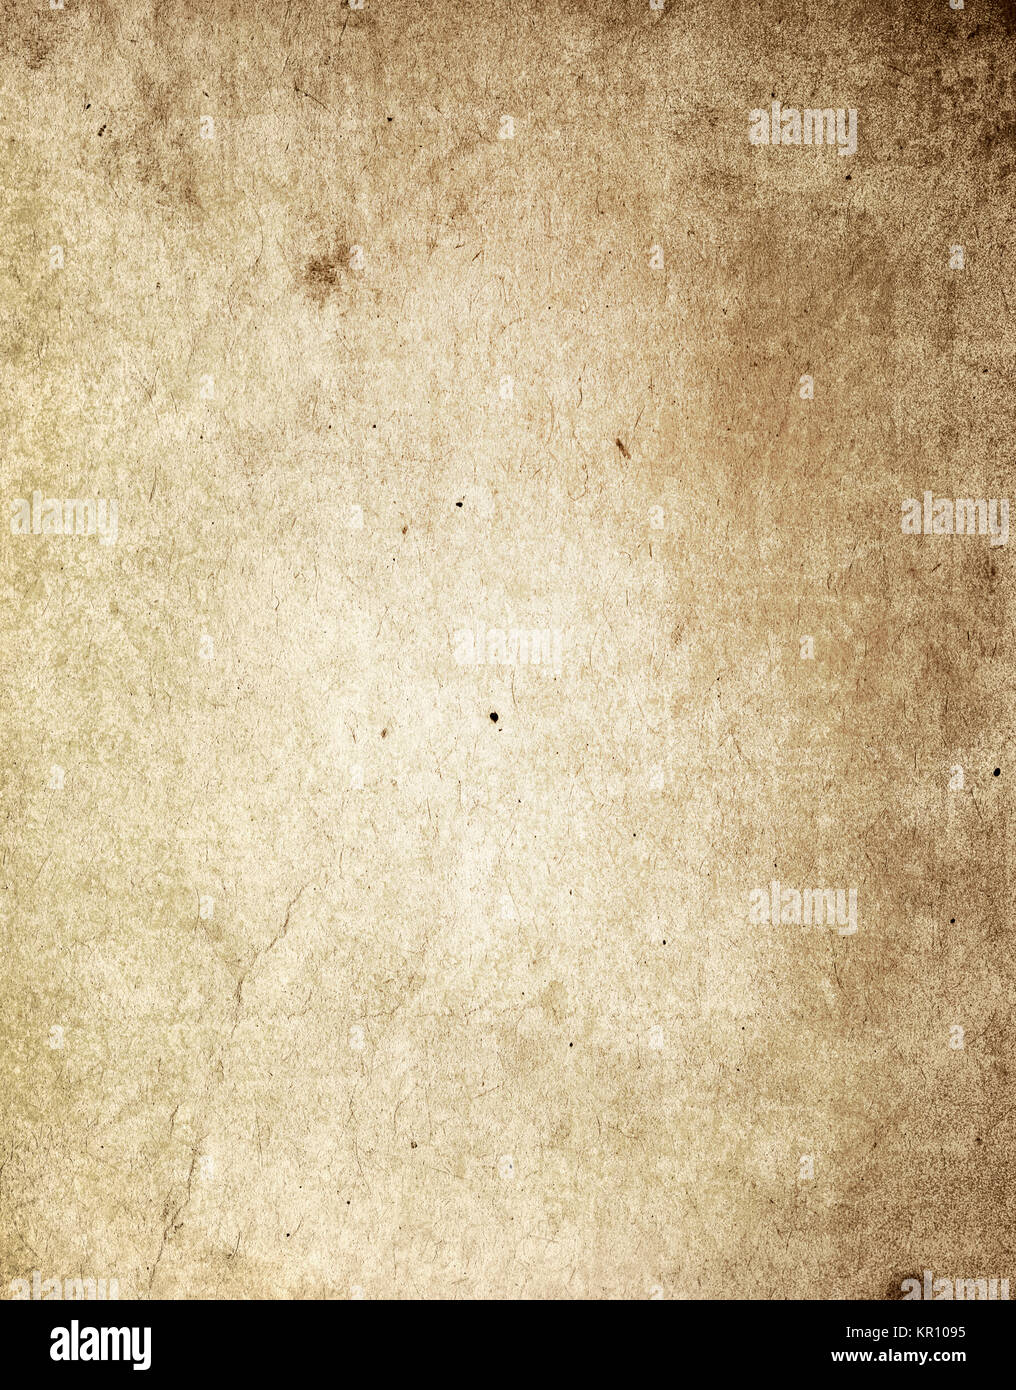 Old paper close up background. Natural texture of old grunge paper. Stock Photo